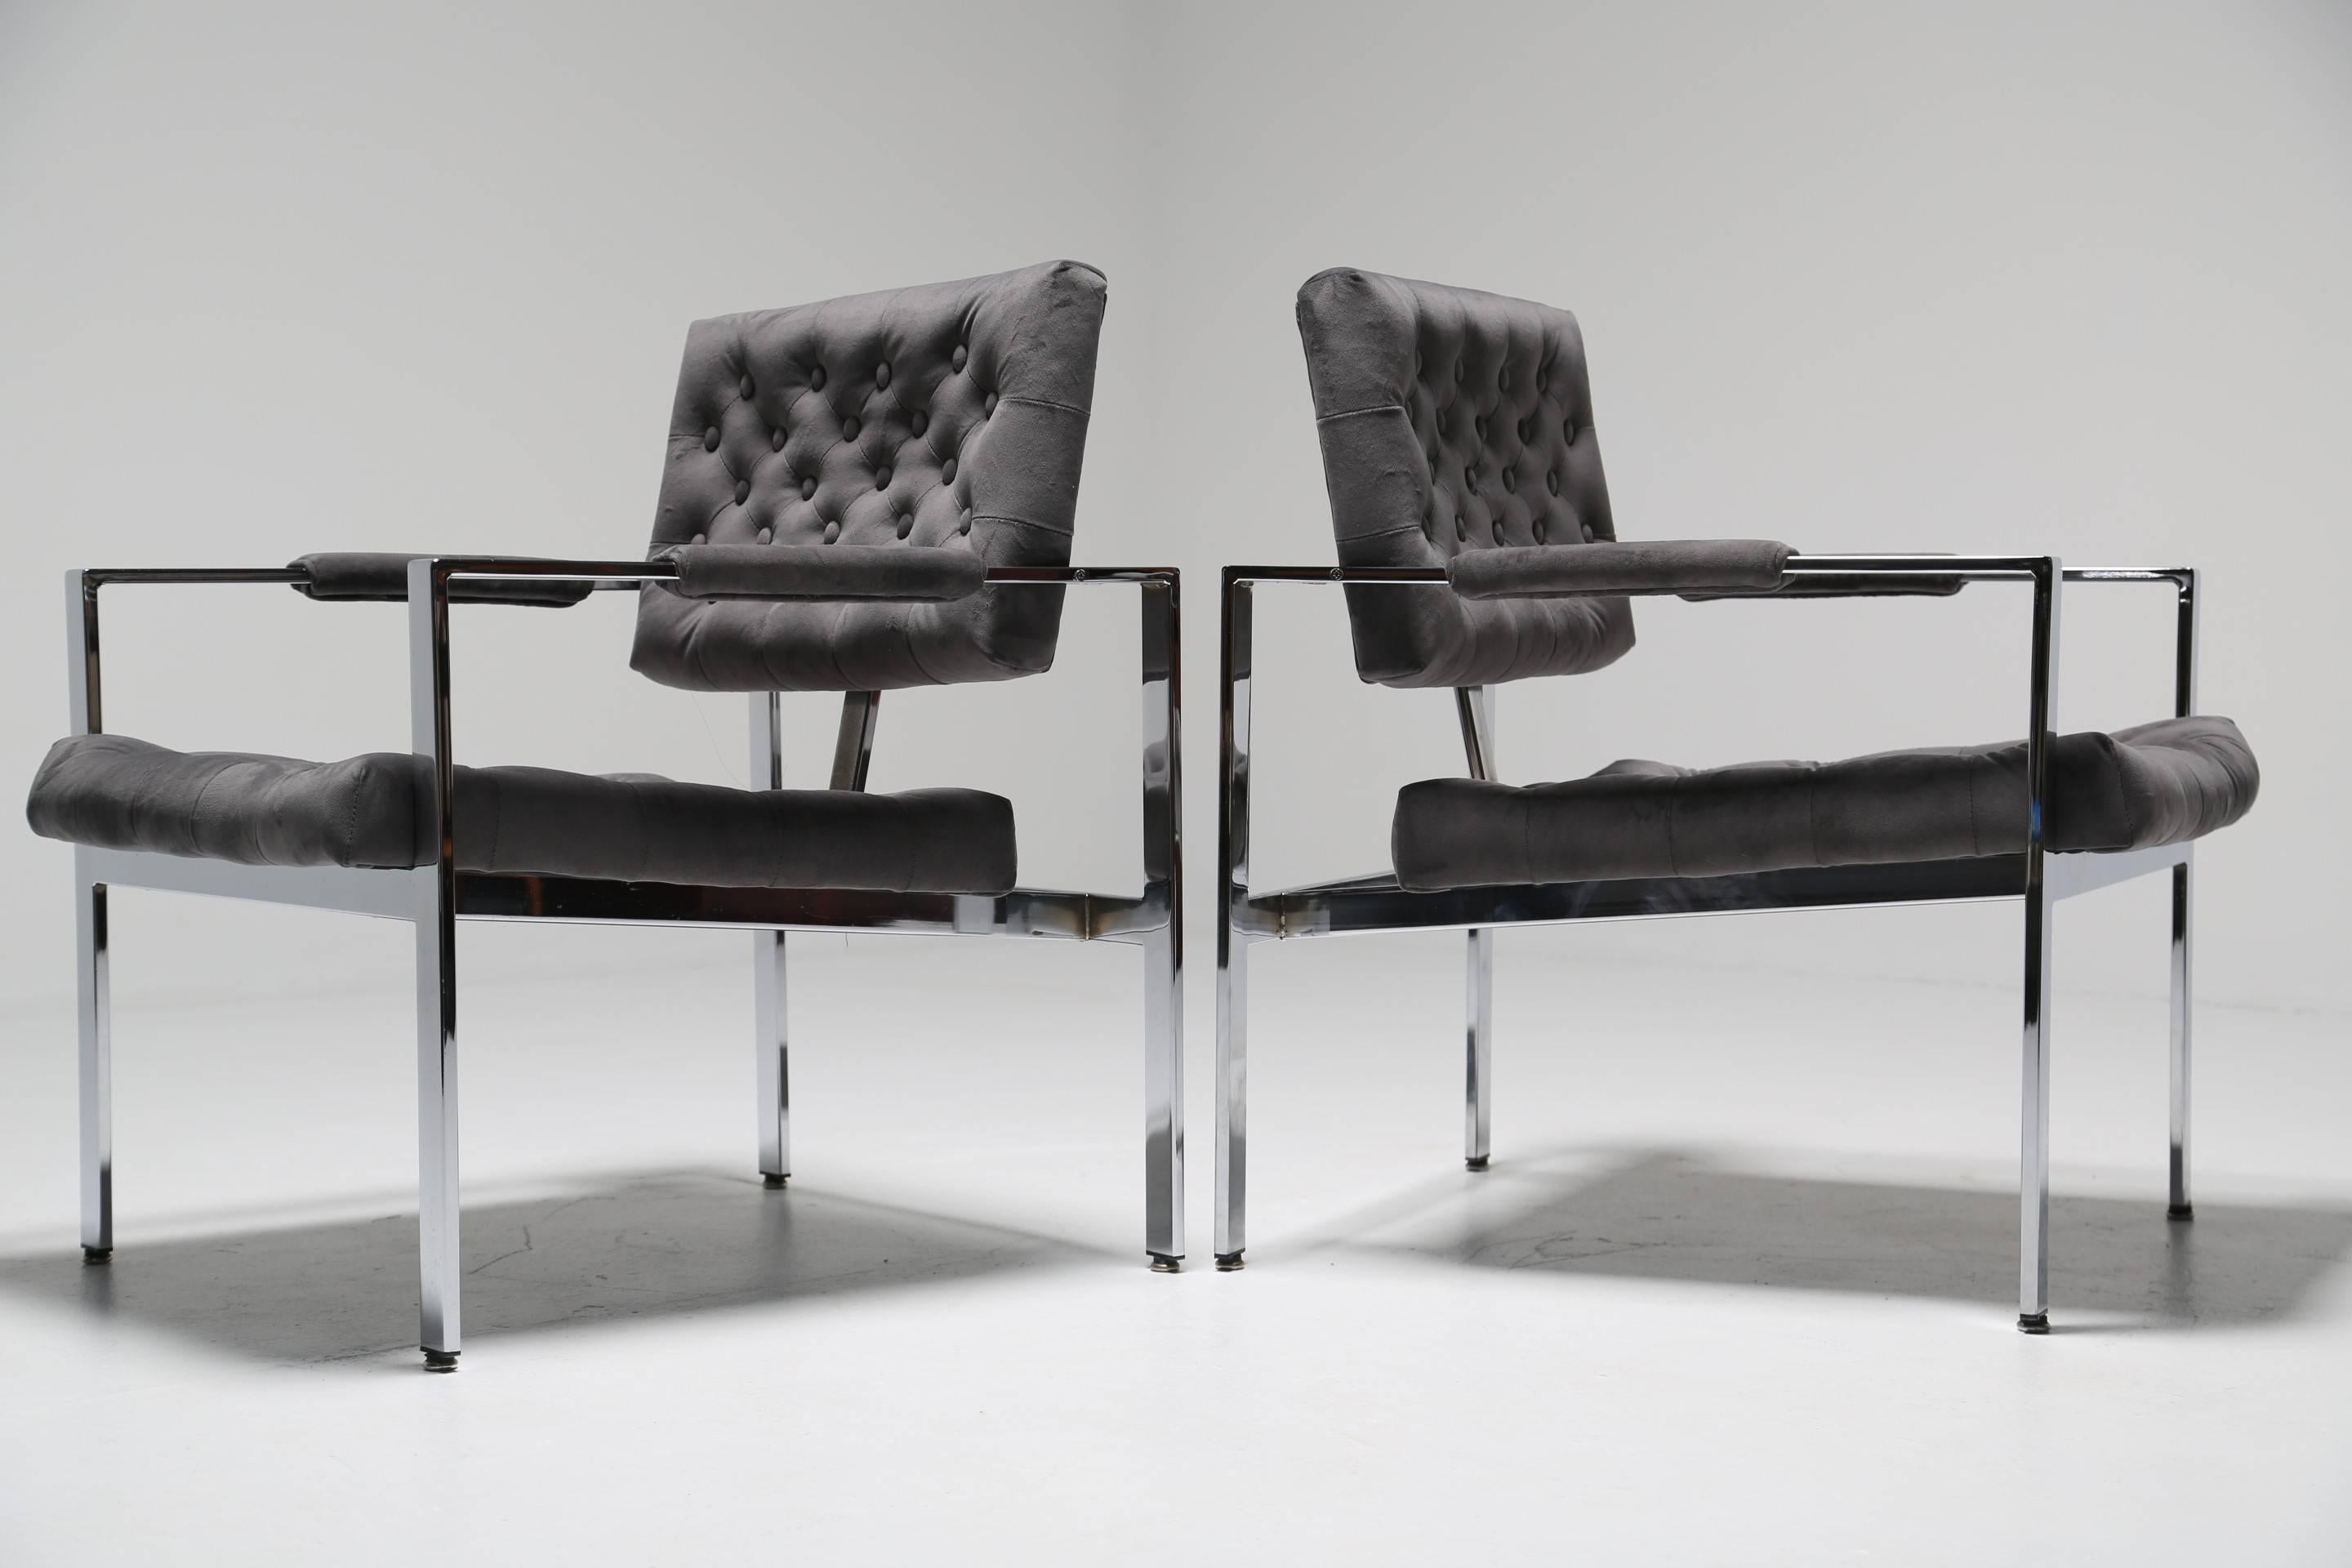 These dramatic pair of pure luxe vintage chrome frame tufted lounge chairs covered in a plush grey velvet crave the limelight. Typical of Milo Baughman's sleek and sophisticated 1970s style, these iconic chairs remain timelessly chic. It is no